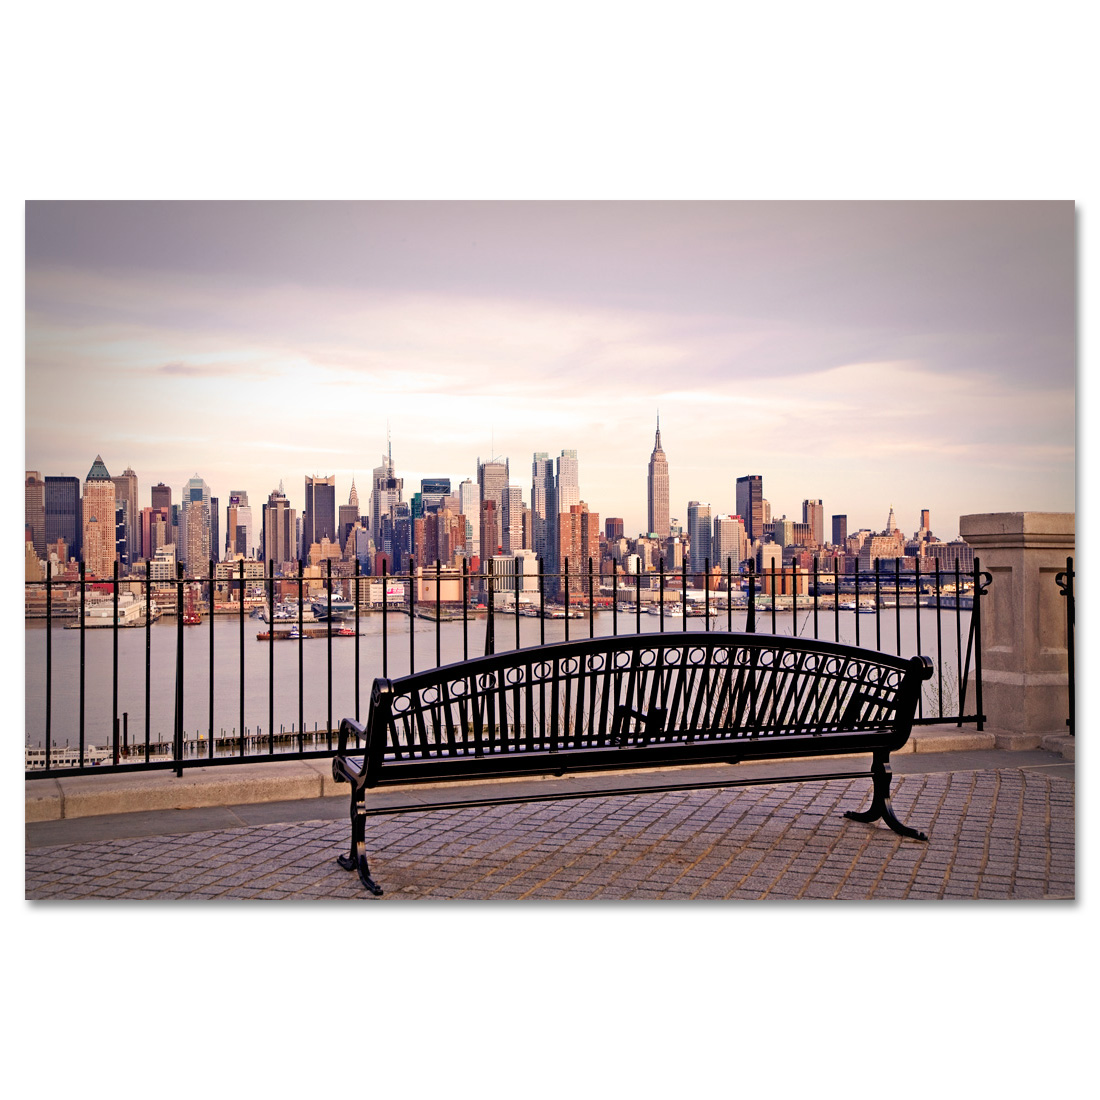 View from Bench at Midtown Manhattan New York Art Print - NY Christmas Gifts